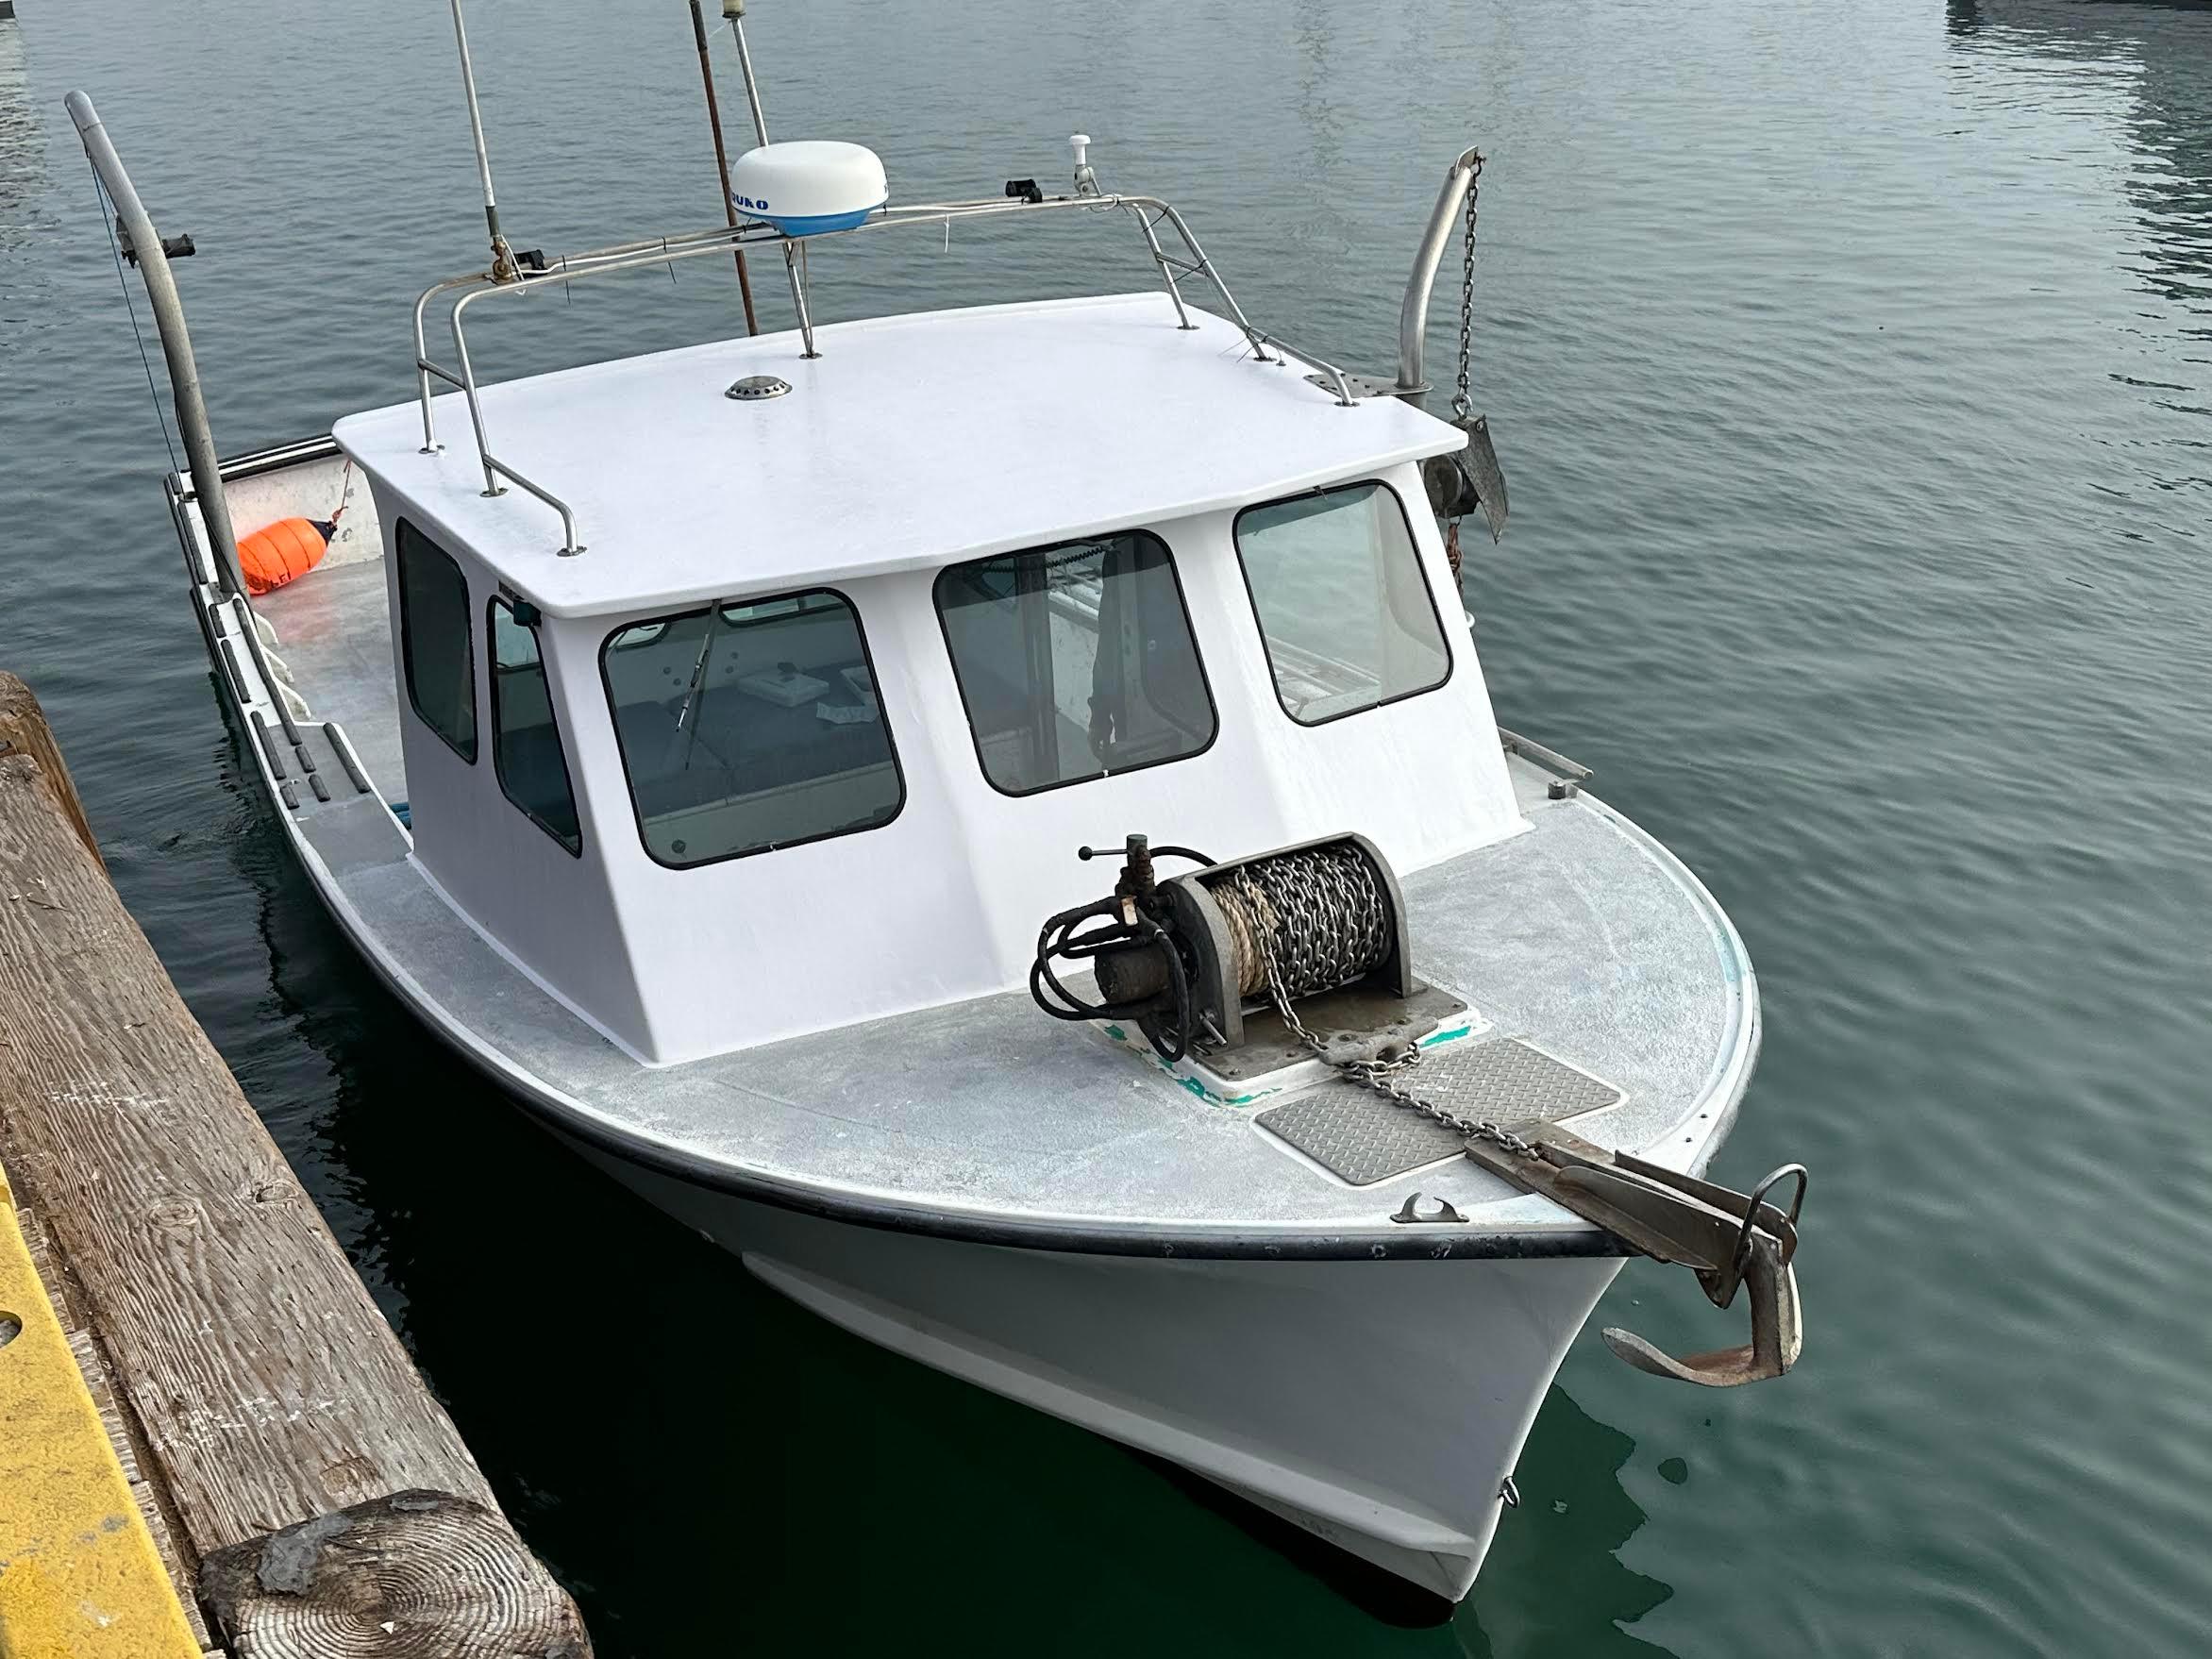 1979 JC Lobster Boat Downeast for sale - YachtWorld